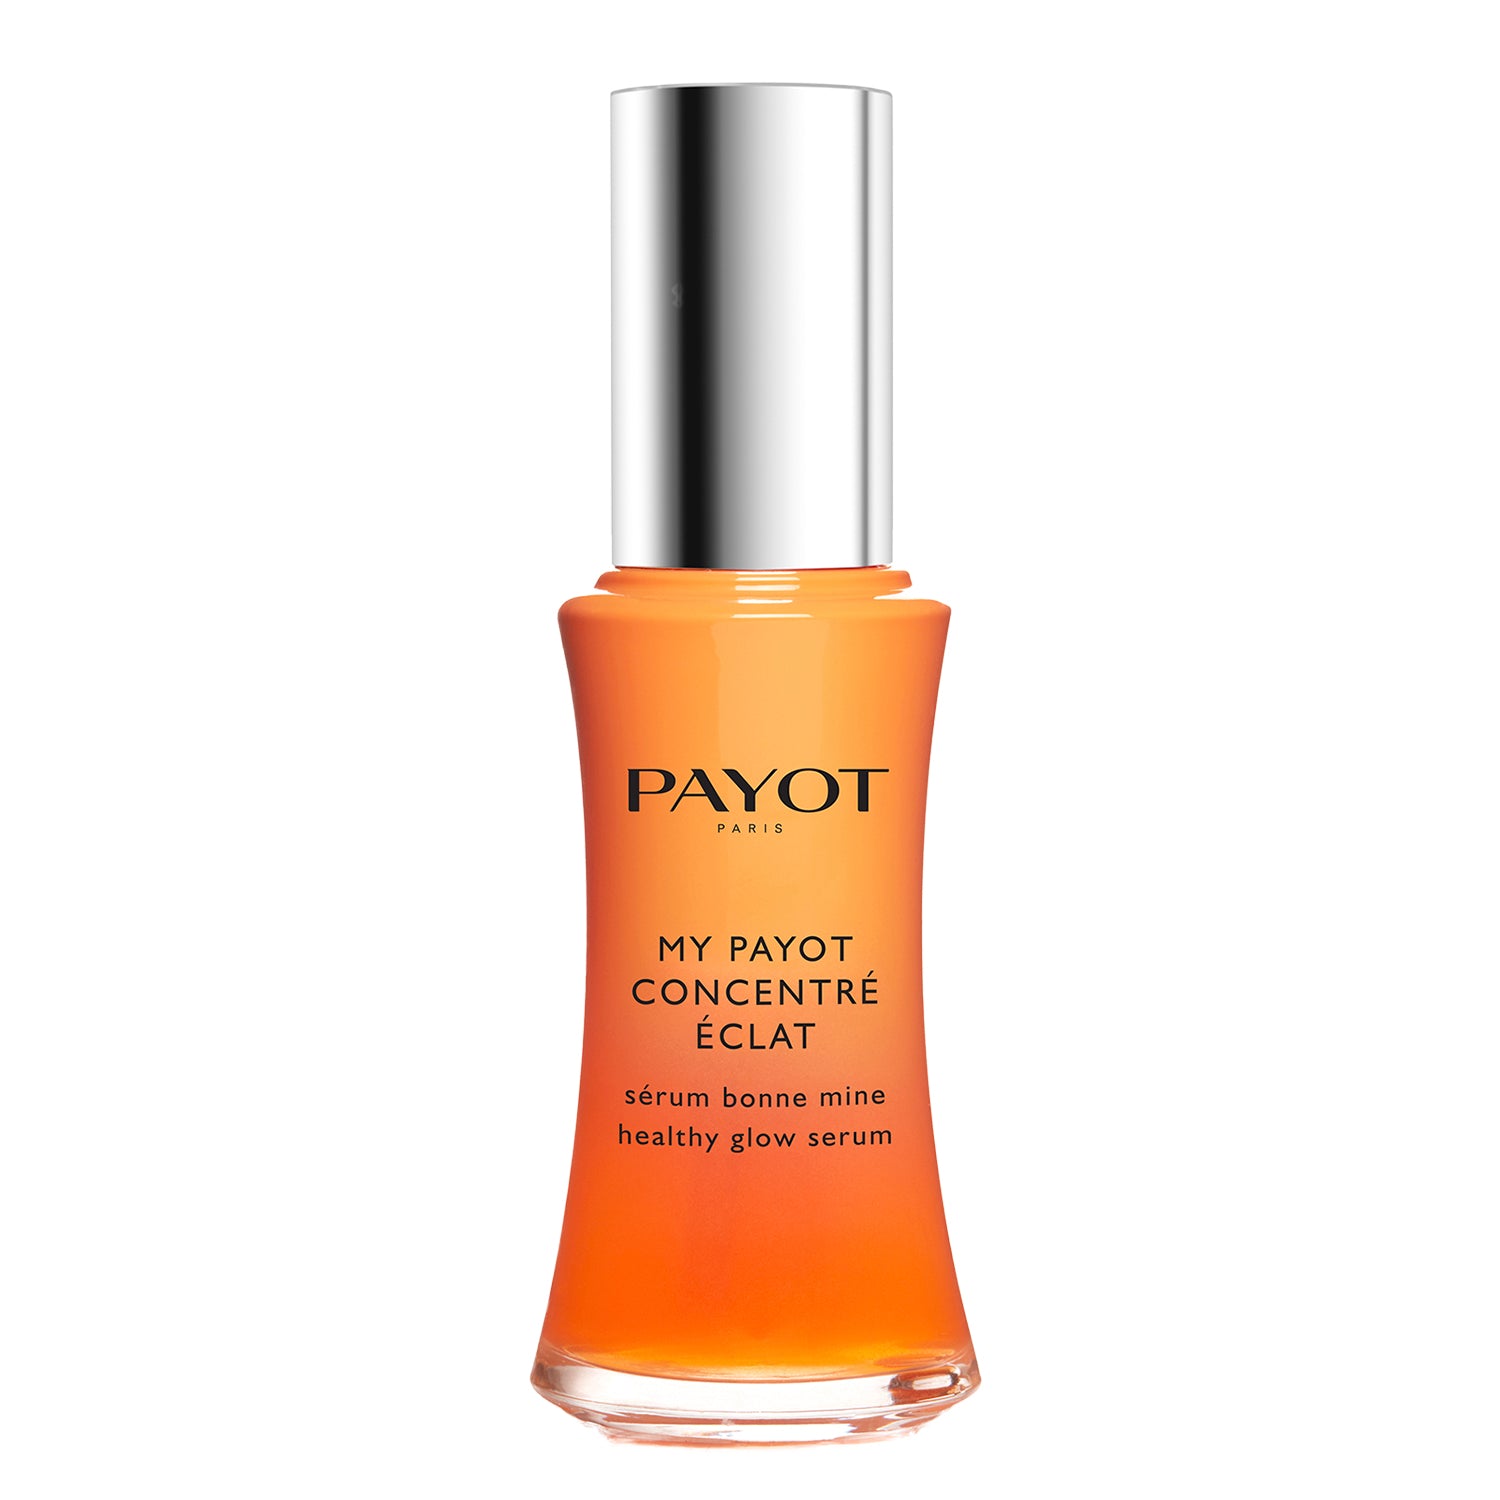 My Payot Concentre Eclat 30ml